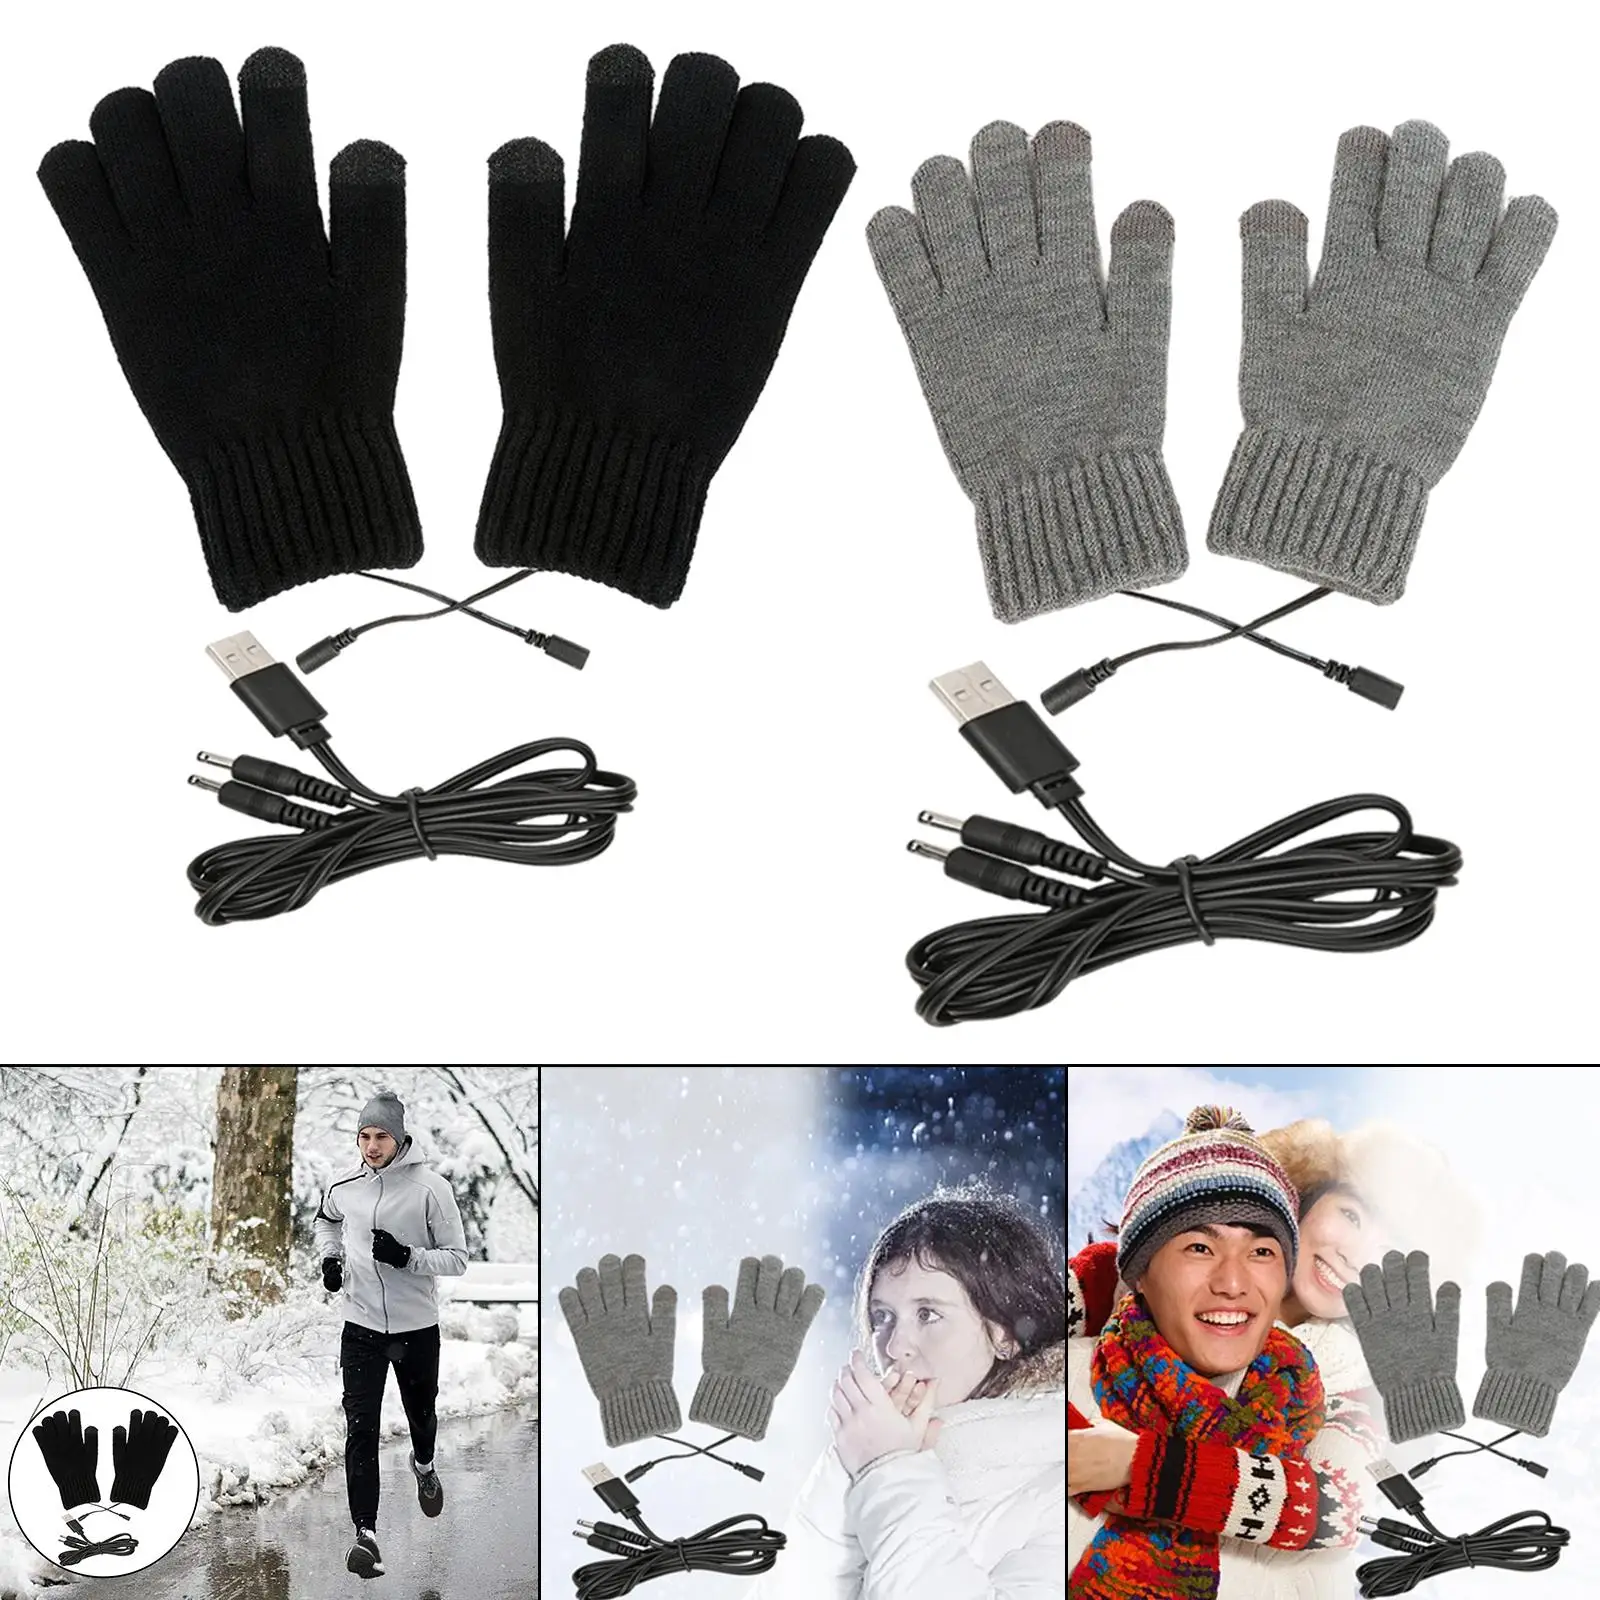  USB Heating Gloves Electric Thermal Knitting Laptop Gloves for Skiing